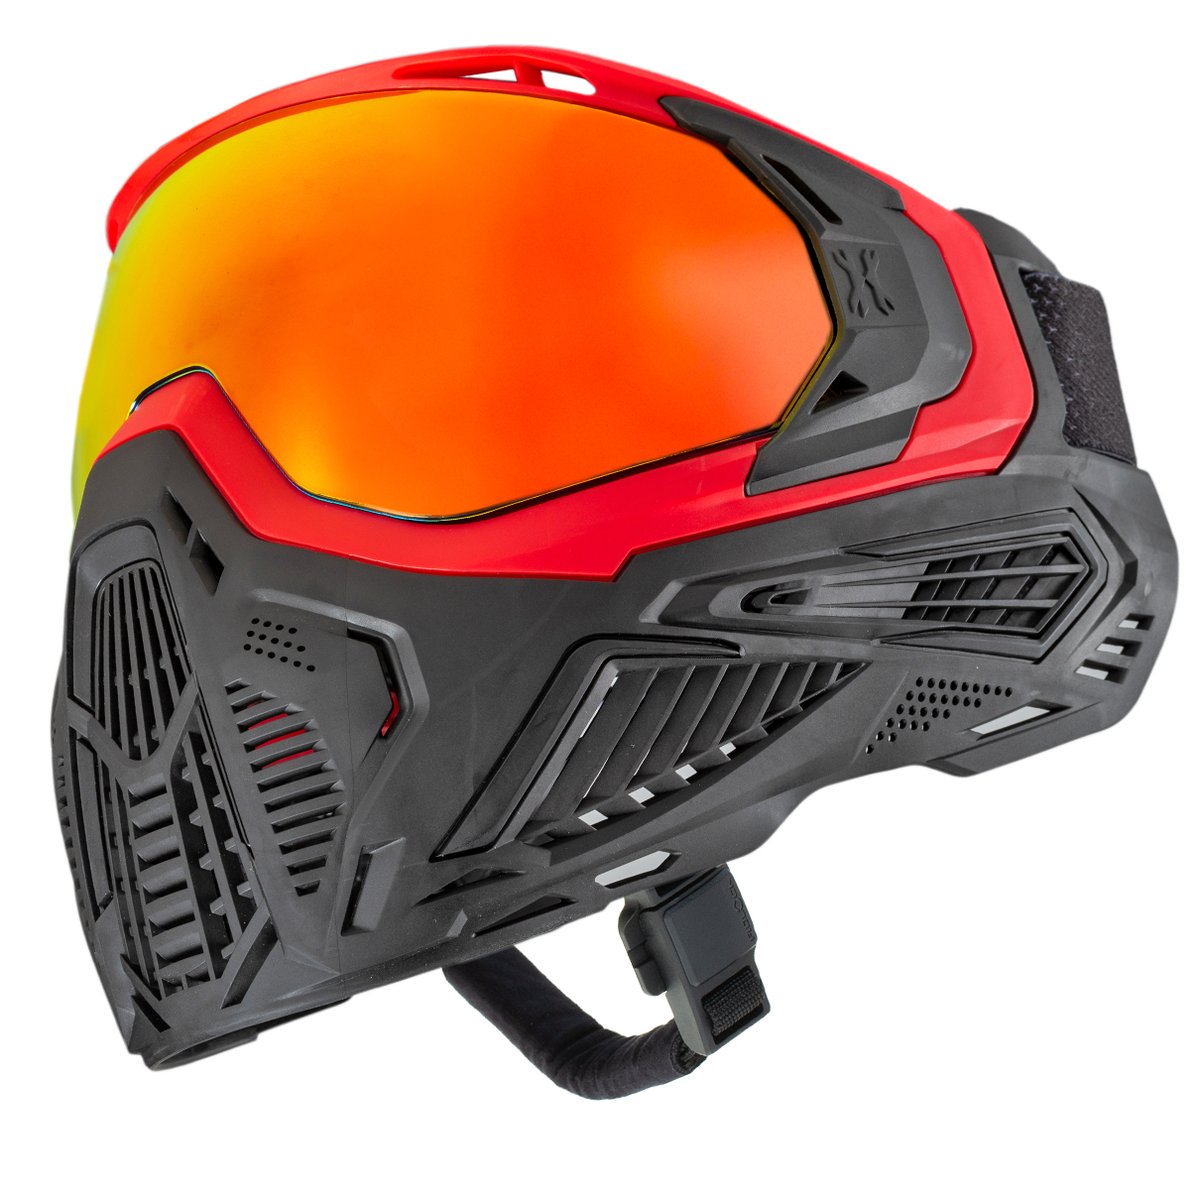 SLR Goggle - Flare (Black/Red) - Eminent Paintball And Airsoft